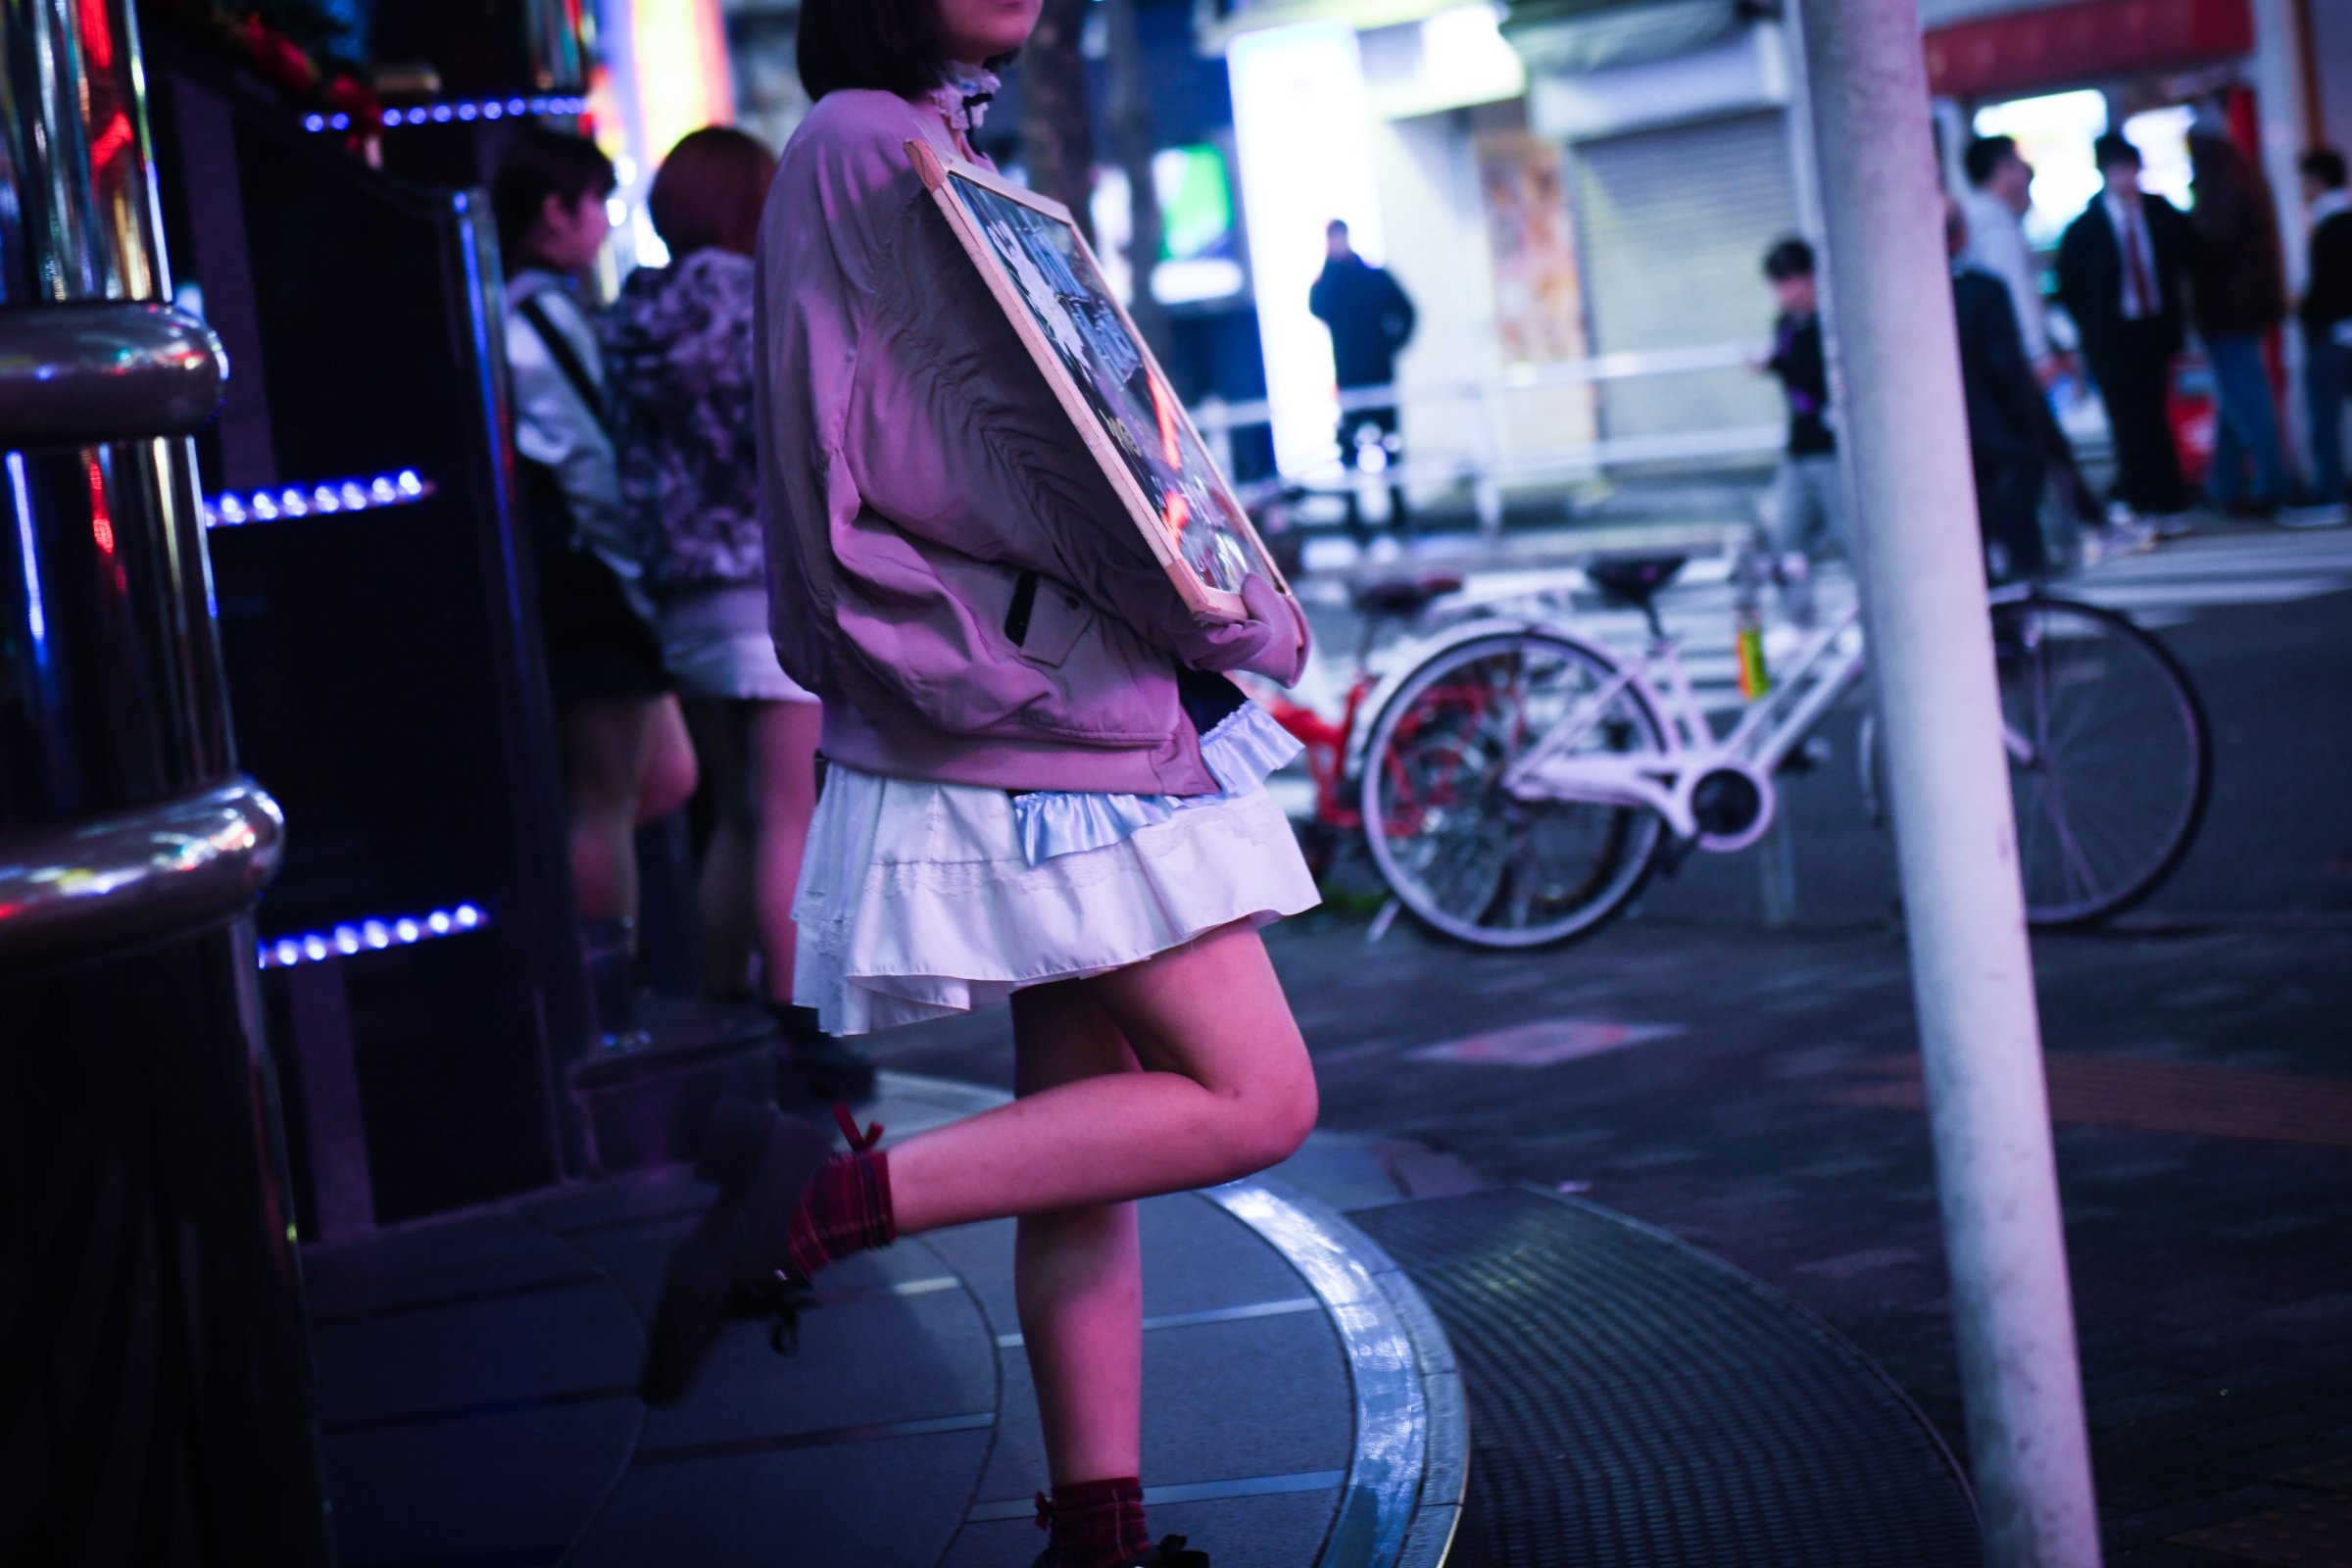 Night Views of Kabukicho As Dealmaking in Escort Bars Thrives in Pockets of Asia